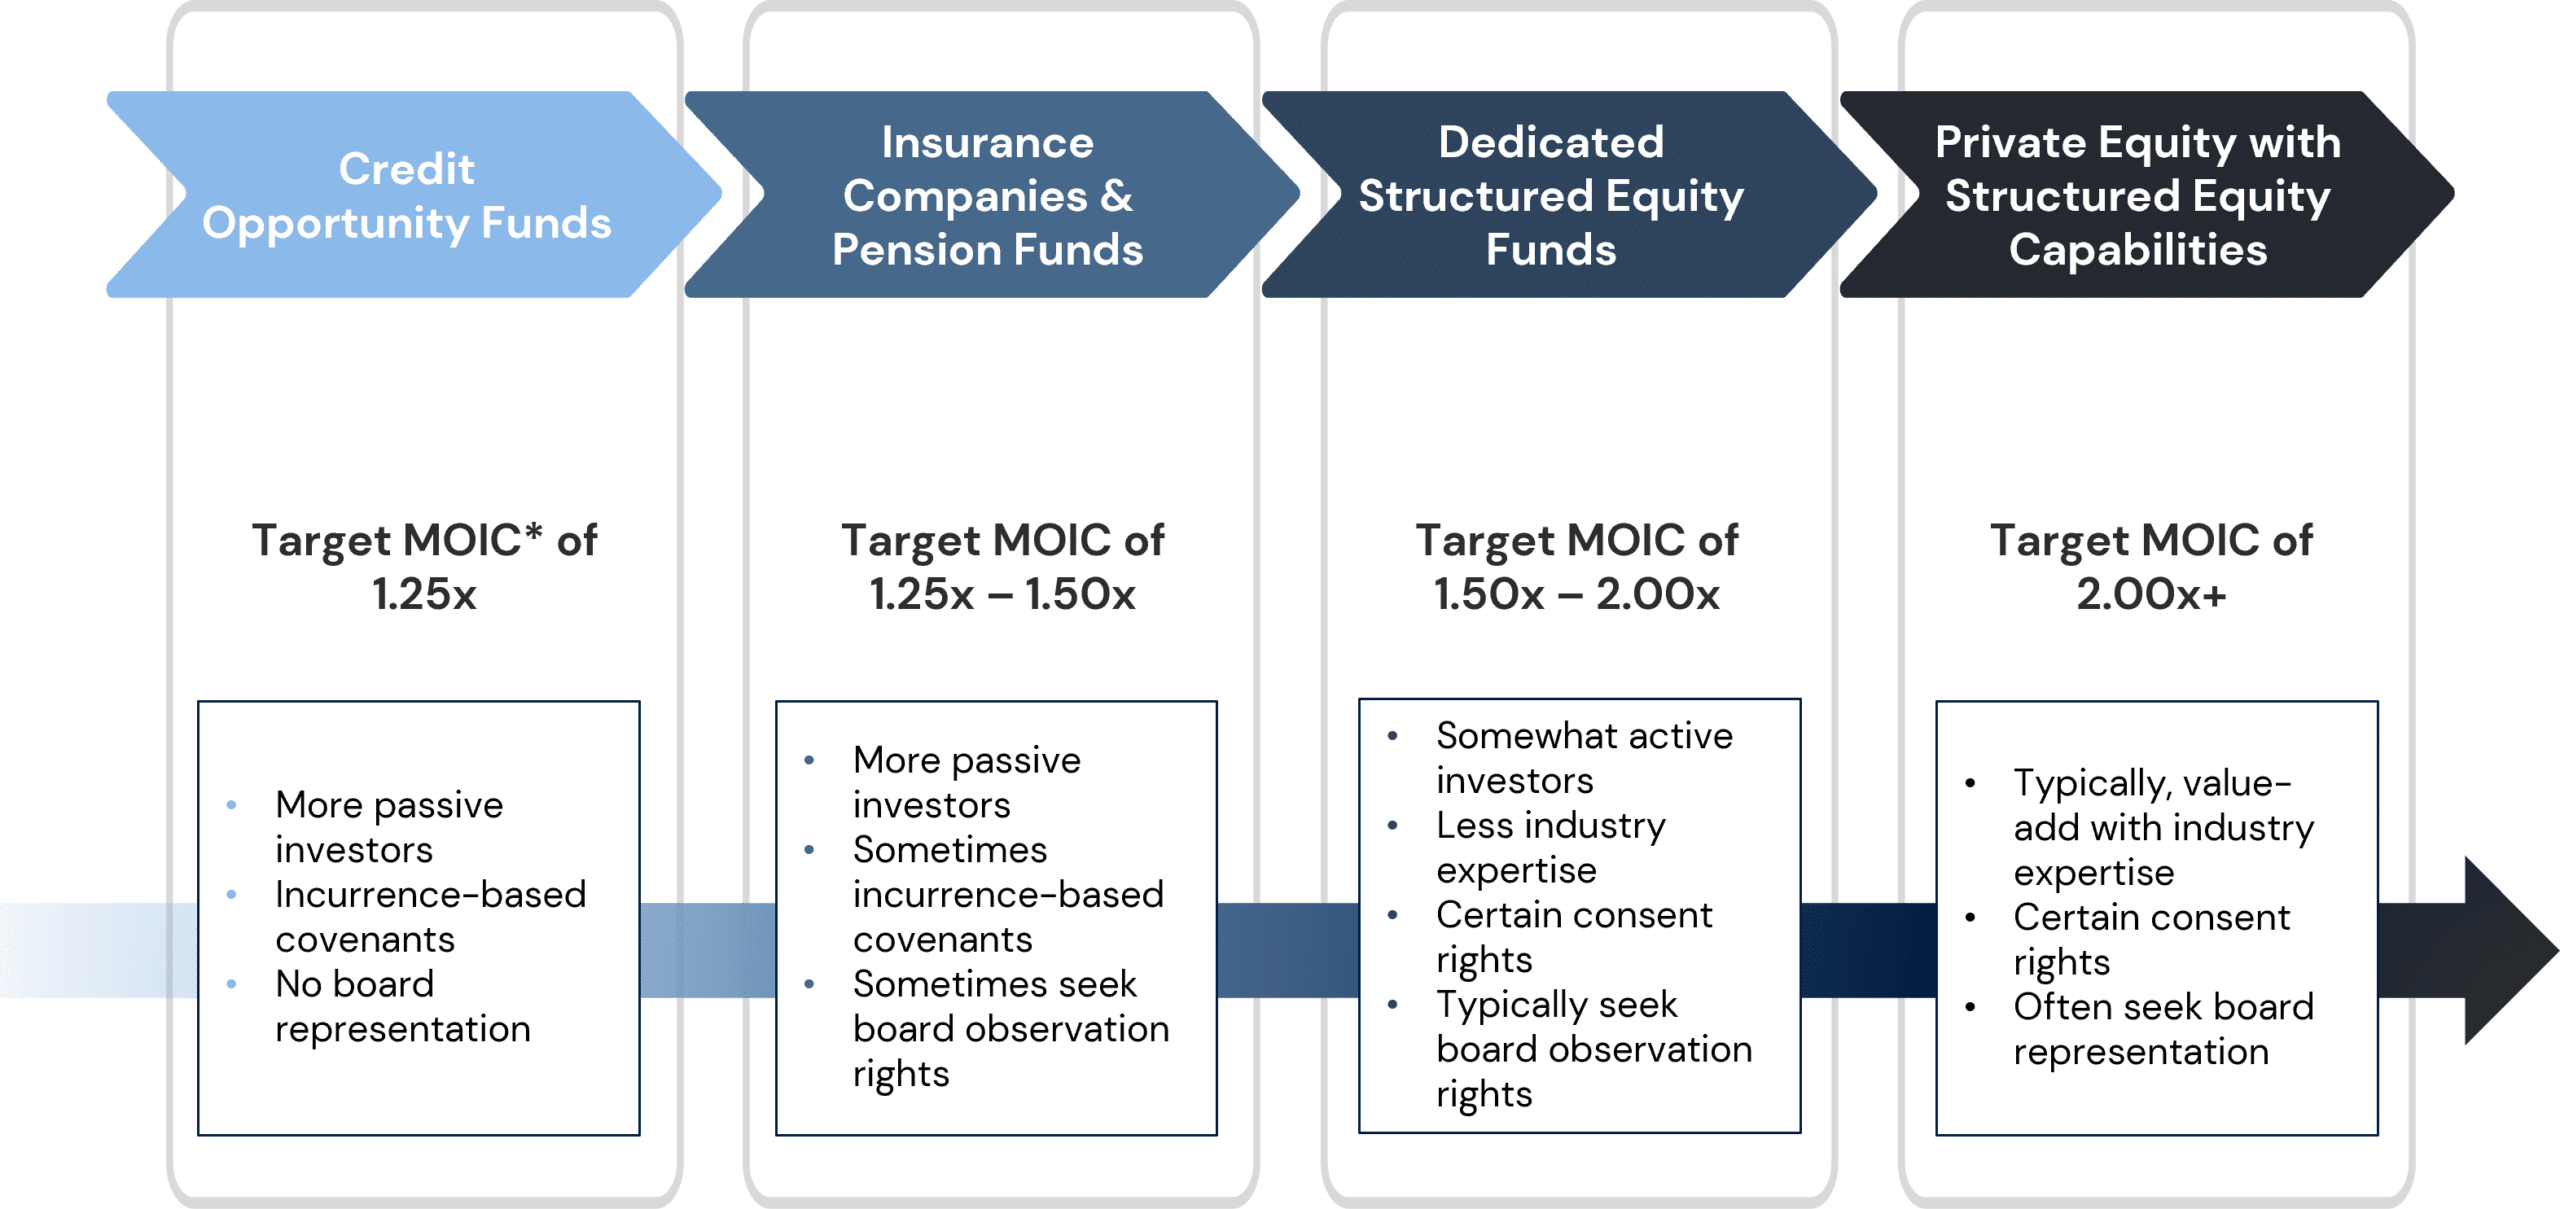 Differences in Structured Equity Investors